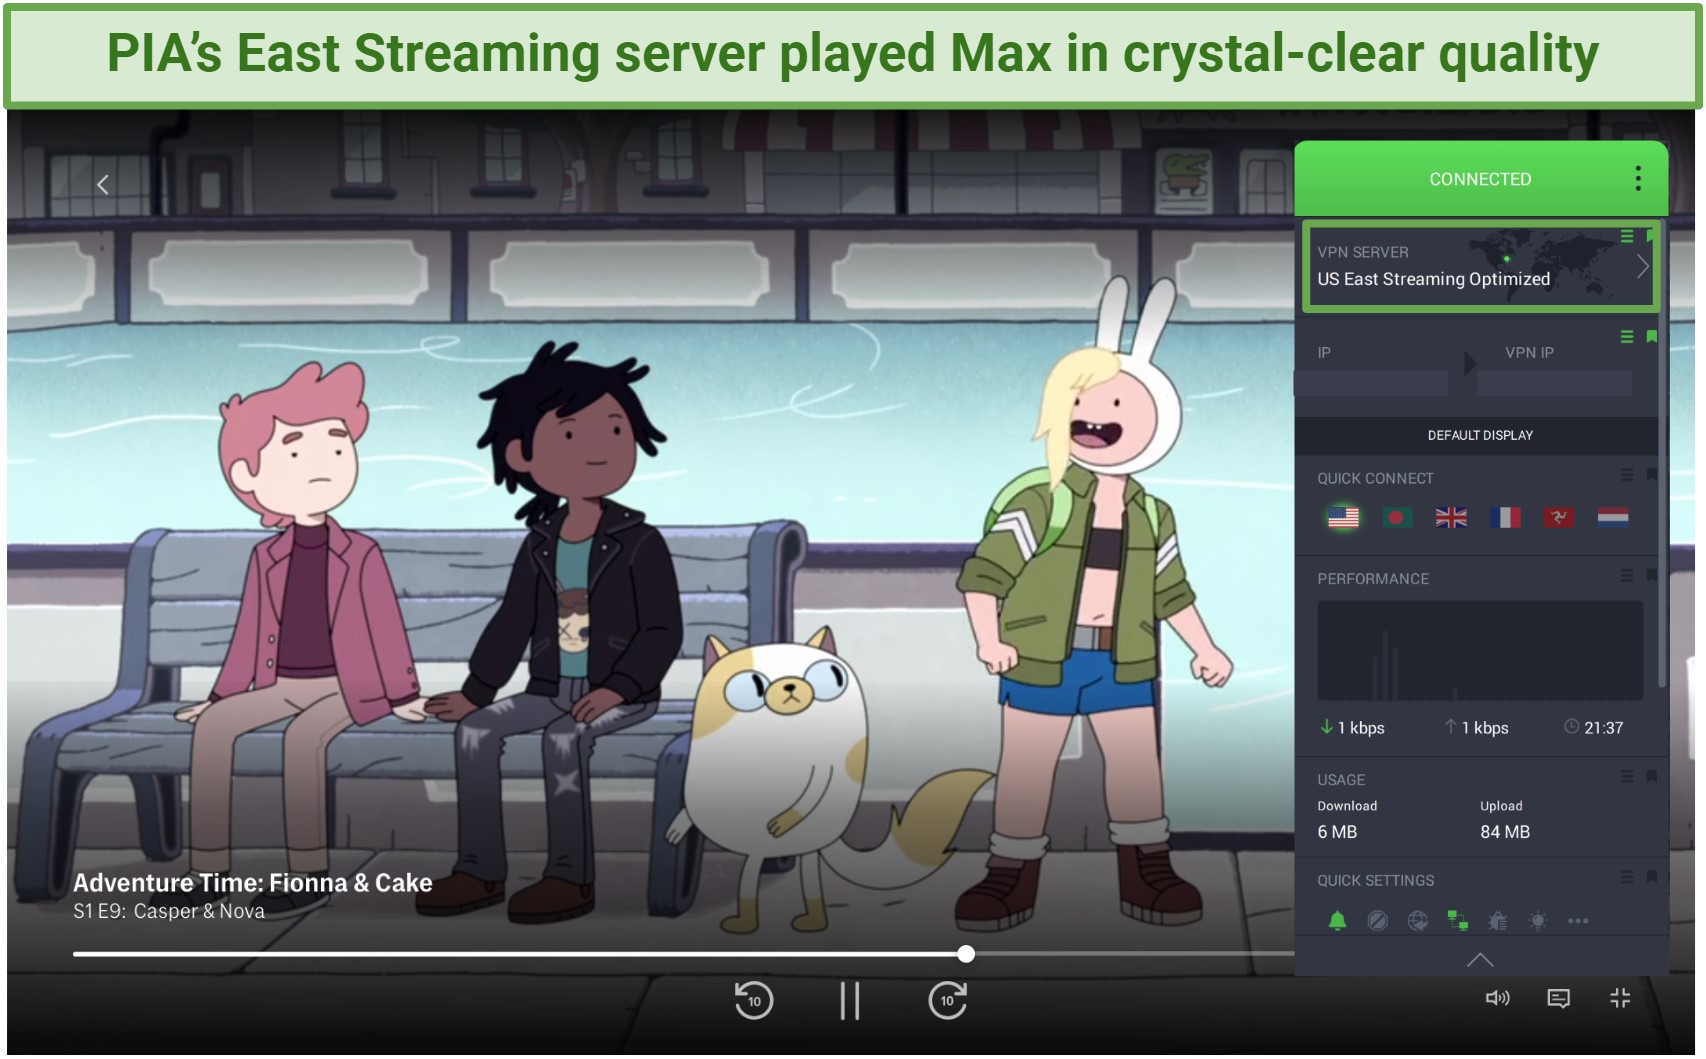 Screenshot of PIA streaming Max on its US East Streaming server